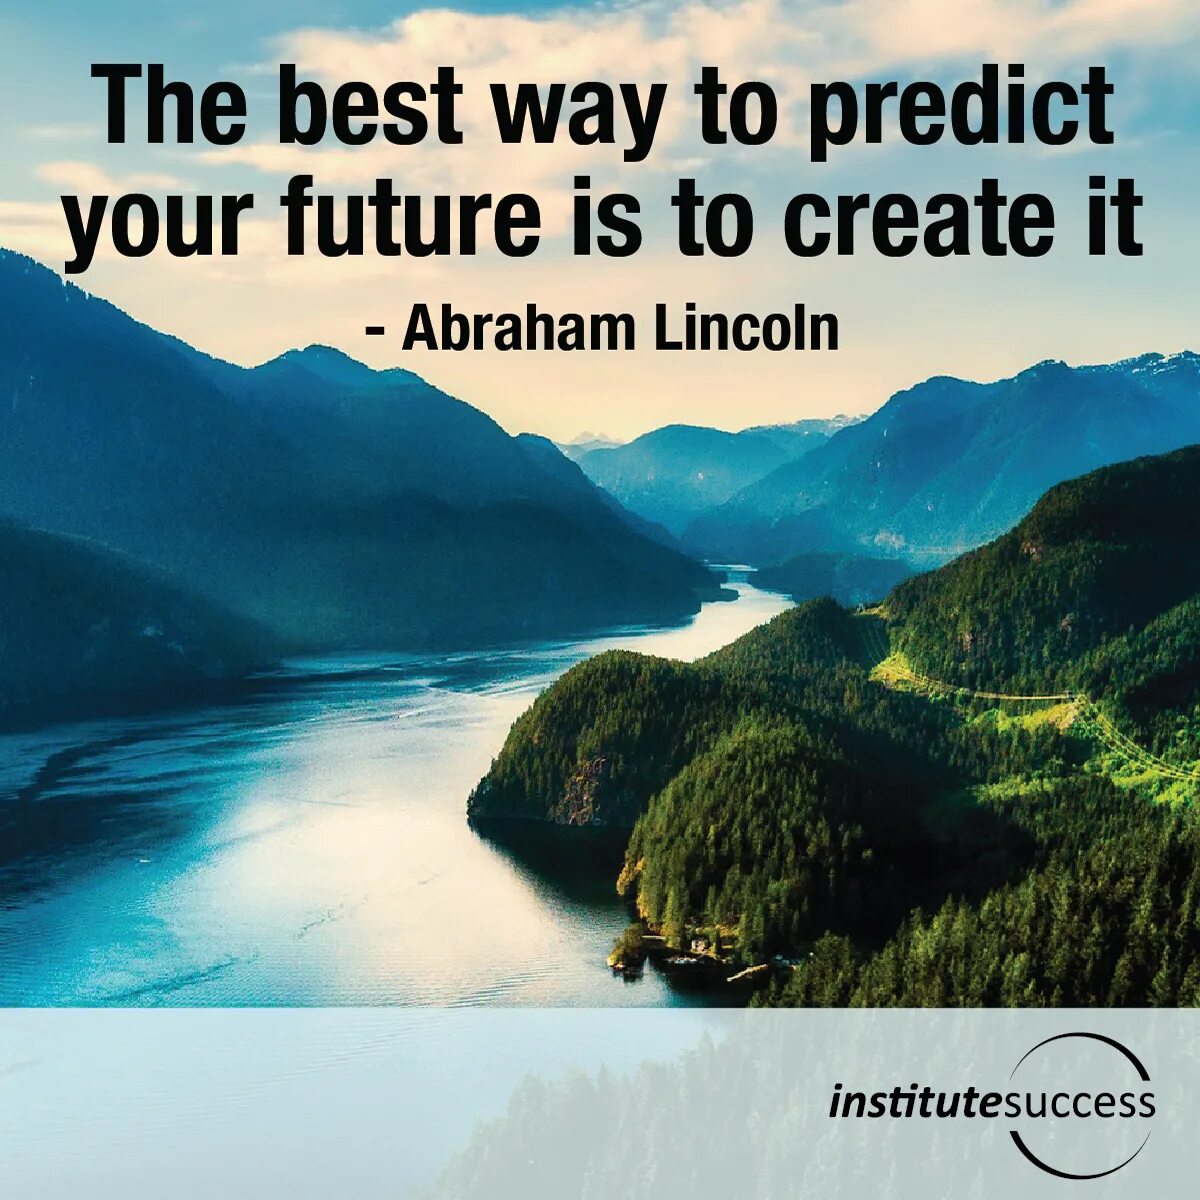 The best way to predict the Future is to create it. The best way to predict the Future. Create the Future. To predict. Just in your way